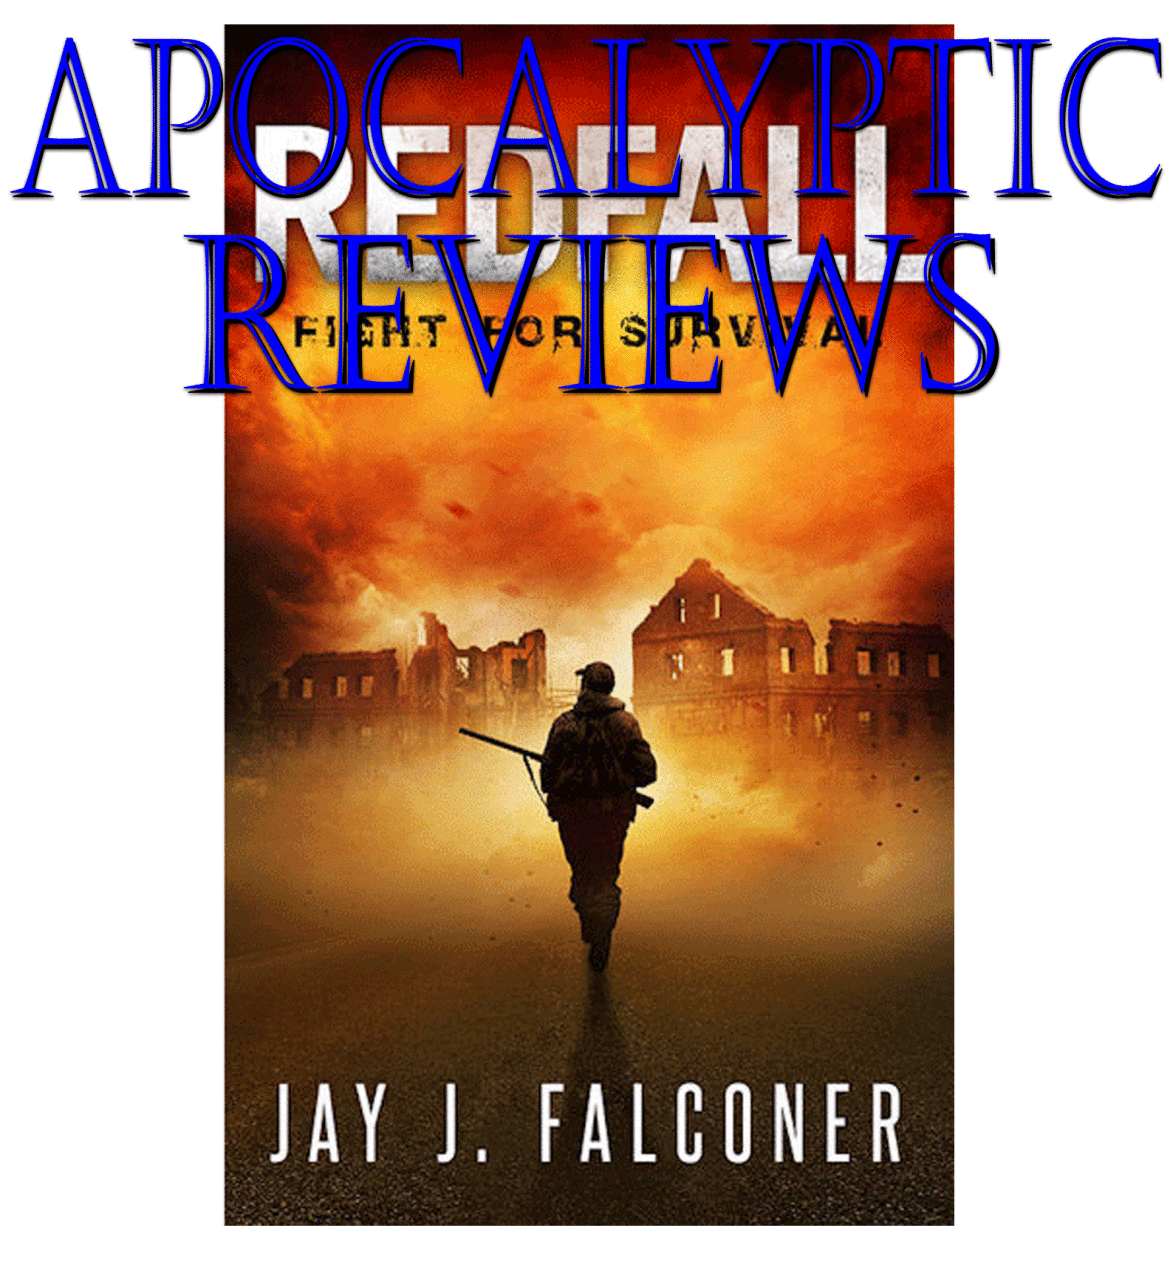 redfall book review